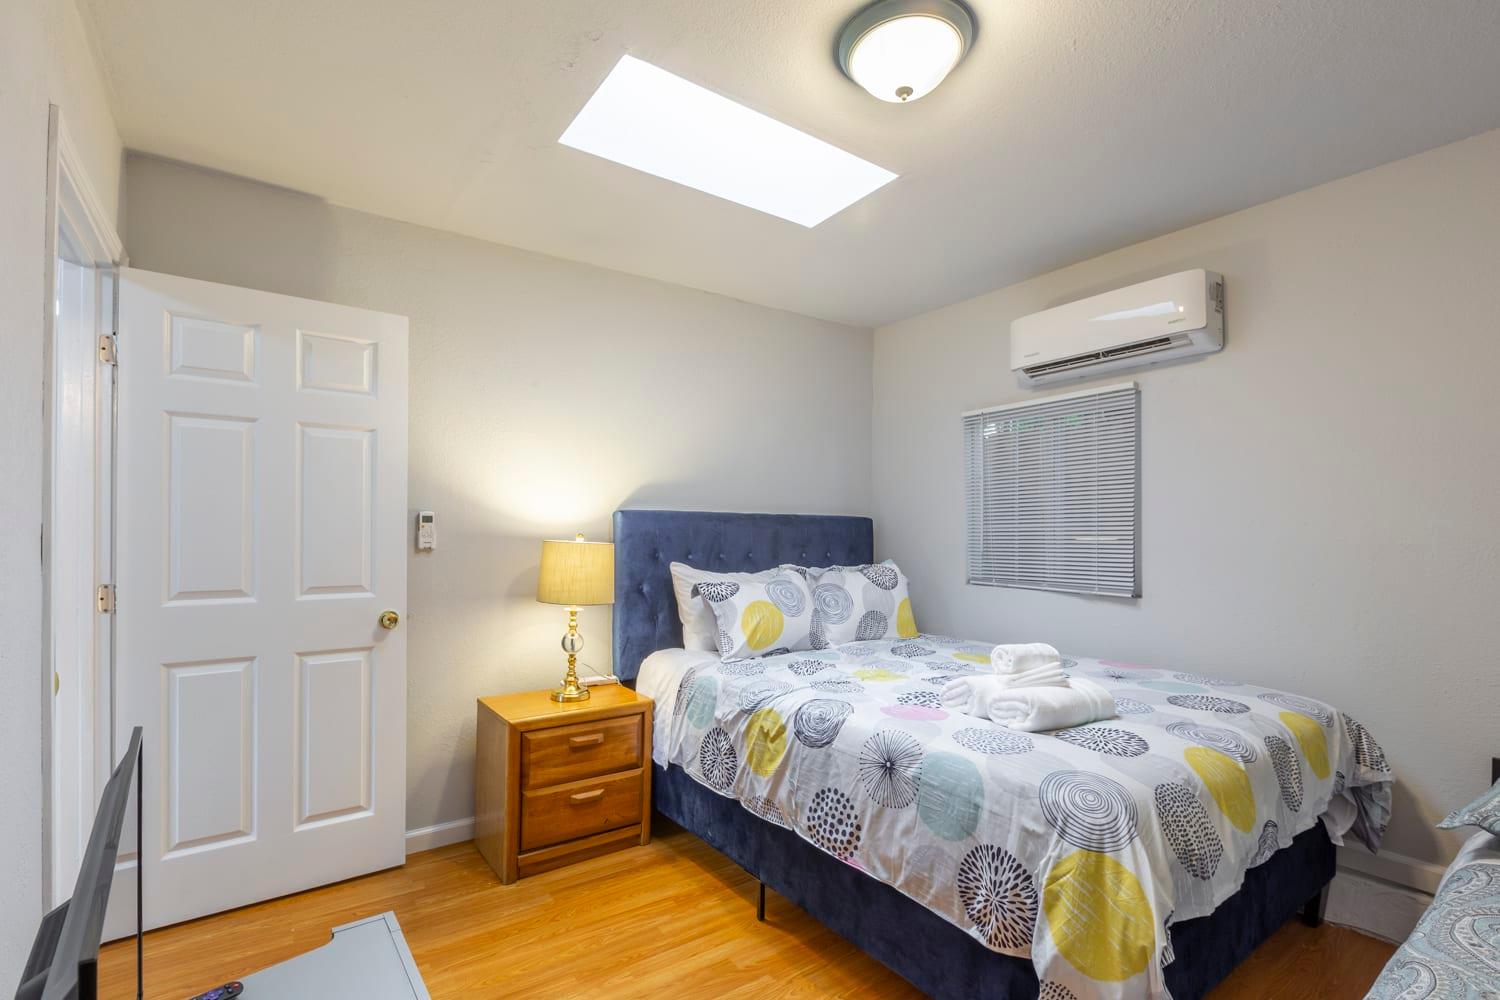 @ Marbella Lane - 2BR Guest House |DTWN RWC| Pking